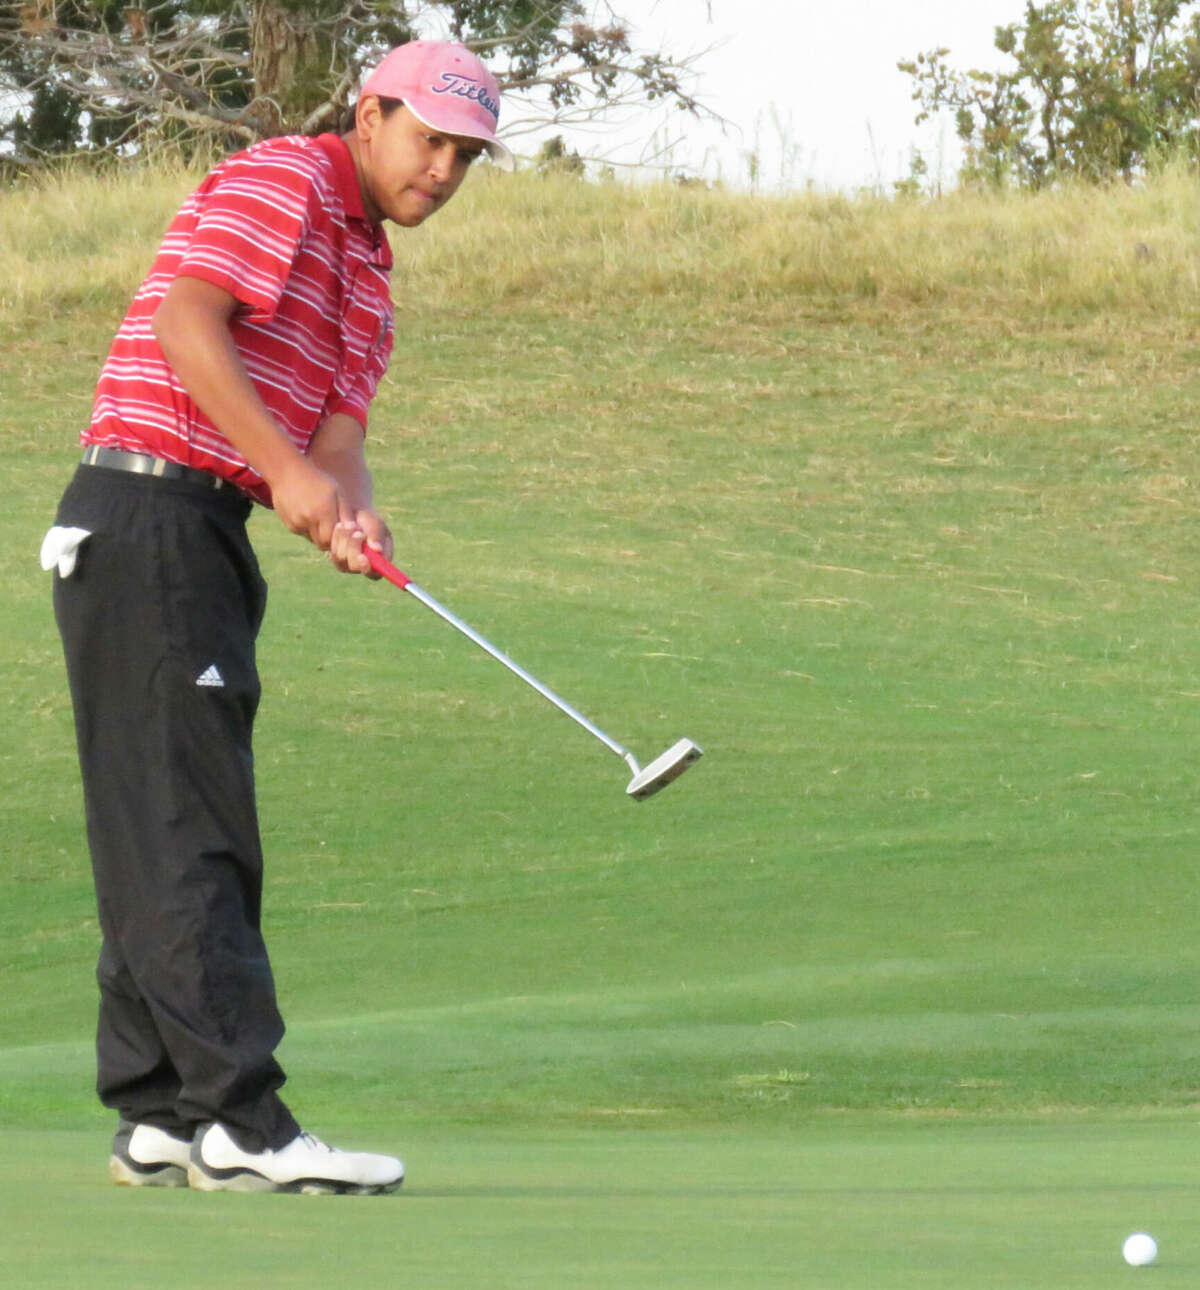 Plainview's Isaiah Garcia follows through on a shot during the Red Raider Classic in Lubbock. Garcia led the Bulldogs with a two-round total of 150 in the tournament, which was played at Shadow Hills Golf Course and The Rawls Course.